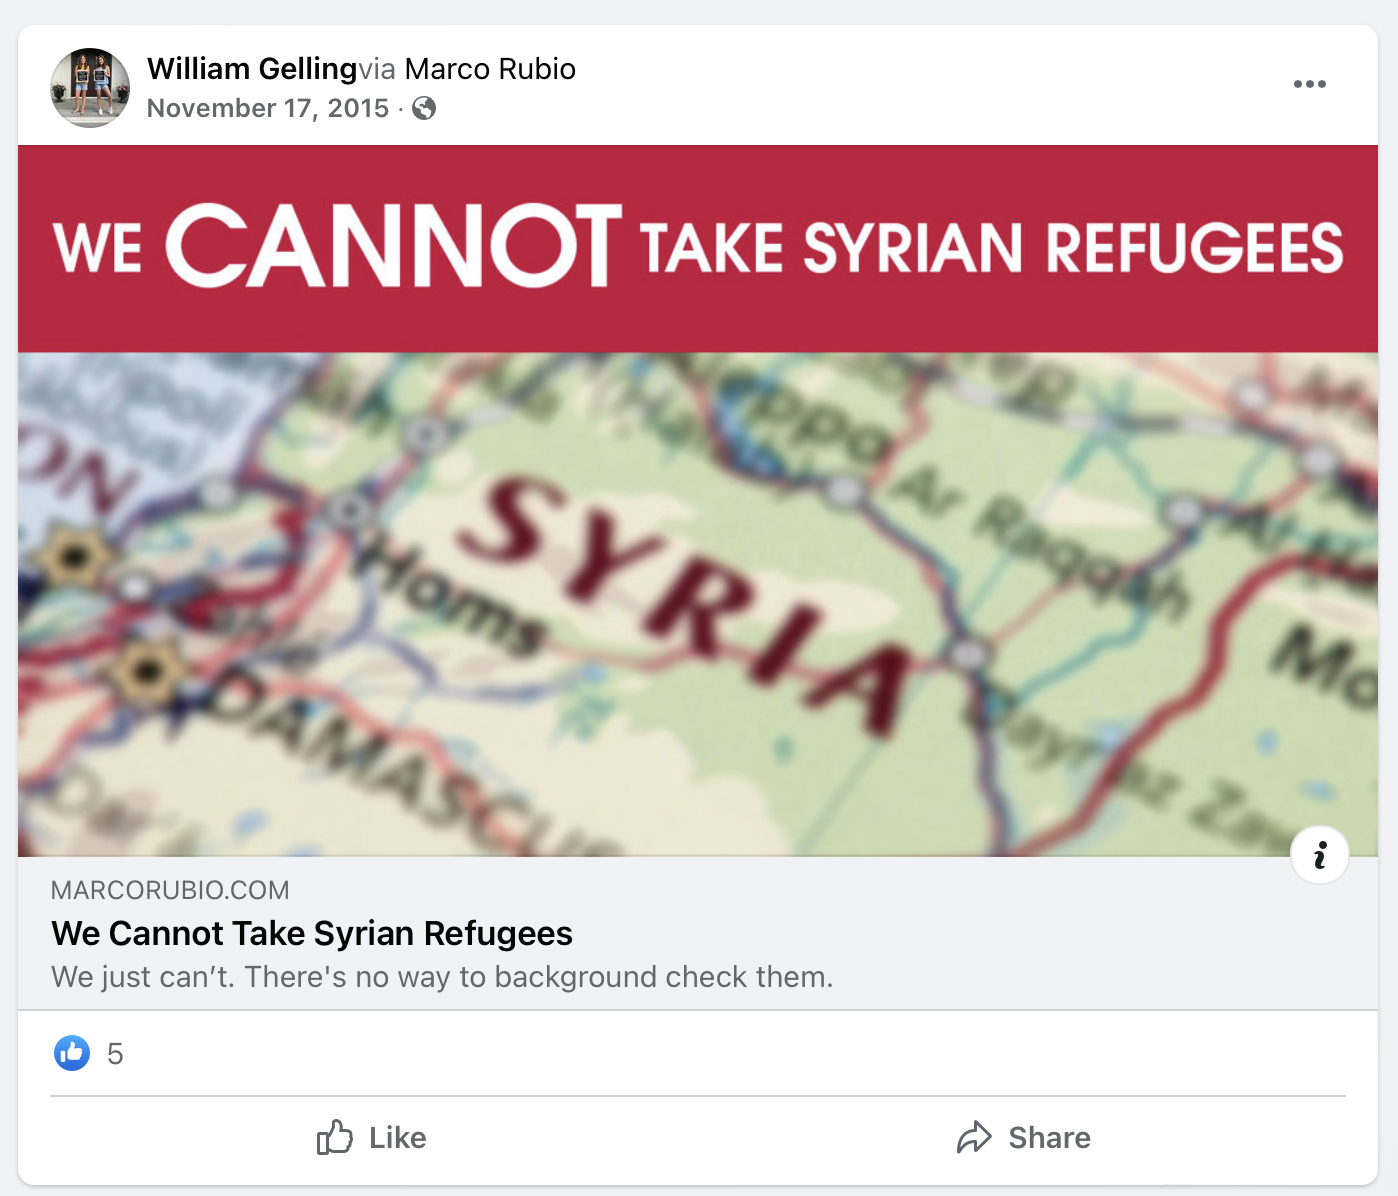 Bill's views on Syrian refugees